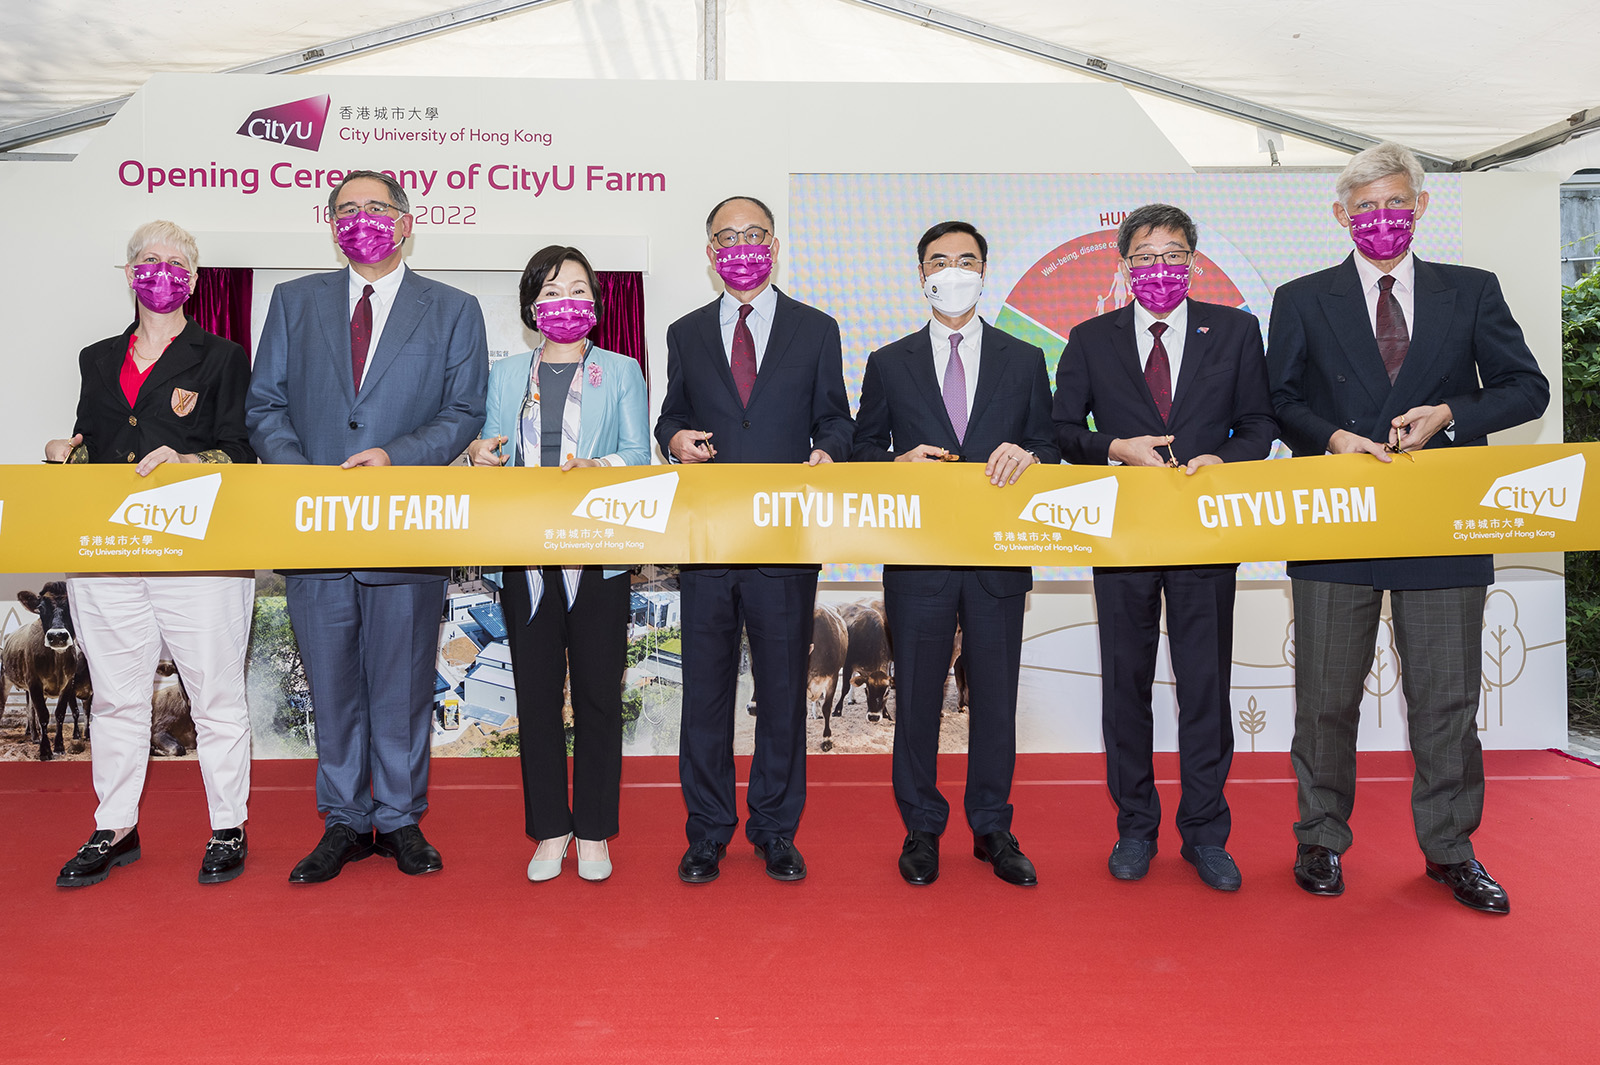 (From left) Professor Vanessa Barrs, Mr Lester Garson Huang, Dr Choi Yuk-lin, Dr Chung Shui-ming, Mr Michael TH Lee, President Way Kuo, Professor Christian Wagner at the opening ceremony of CityU Farm.